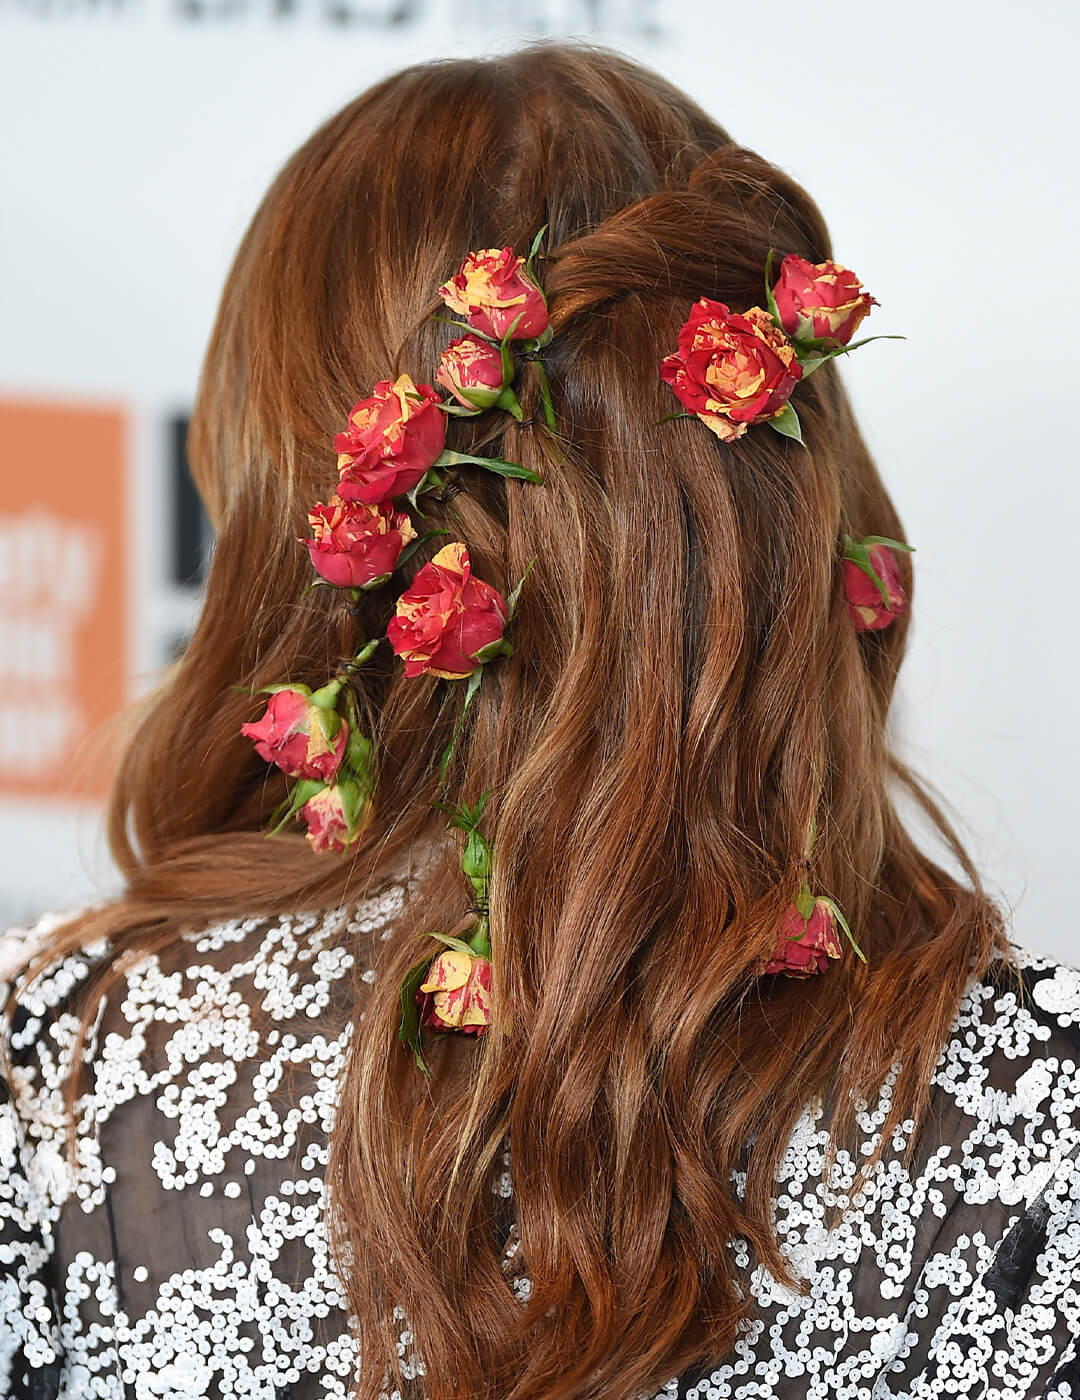 Back view of Emma Stone's hair embellished with flowers